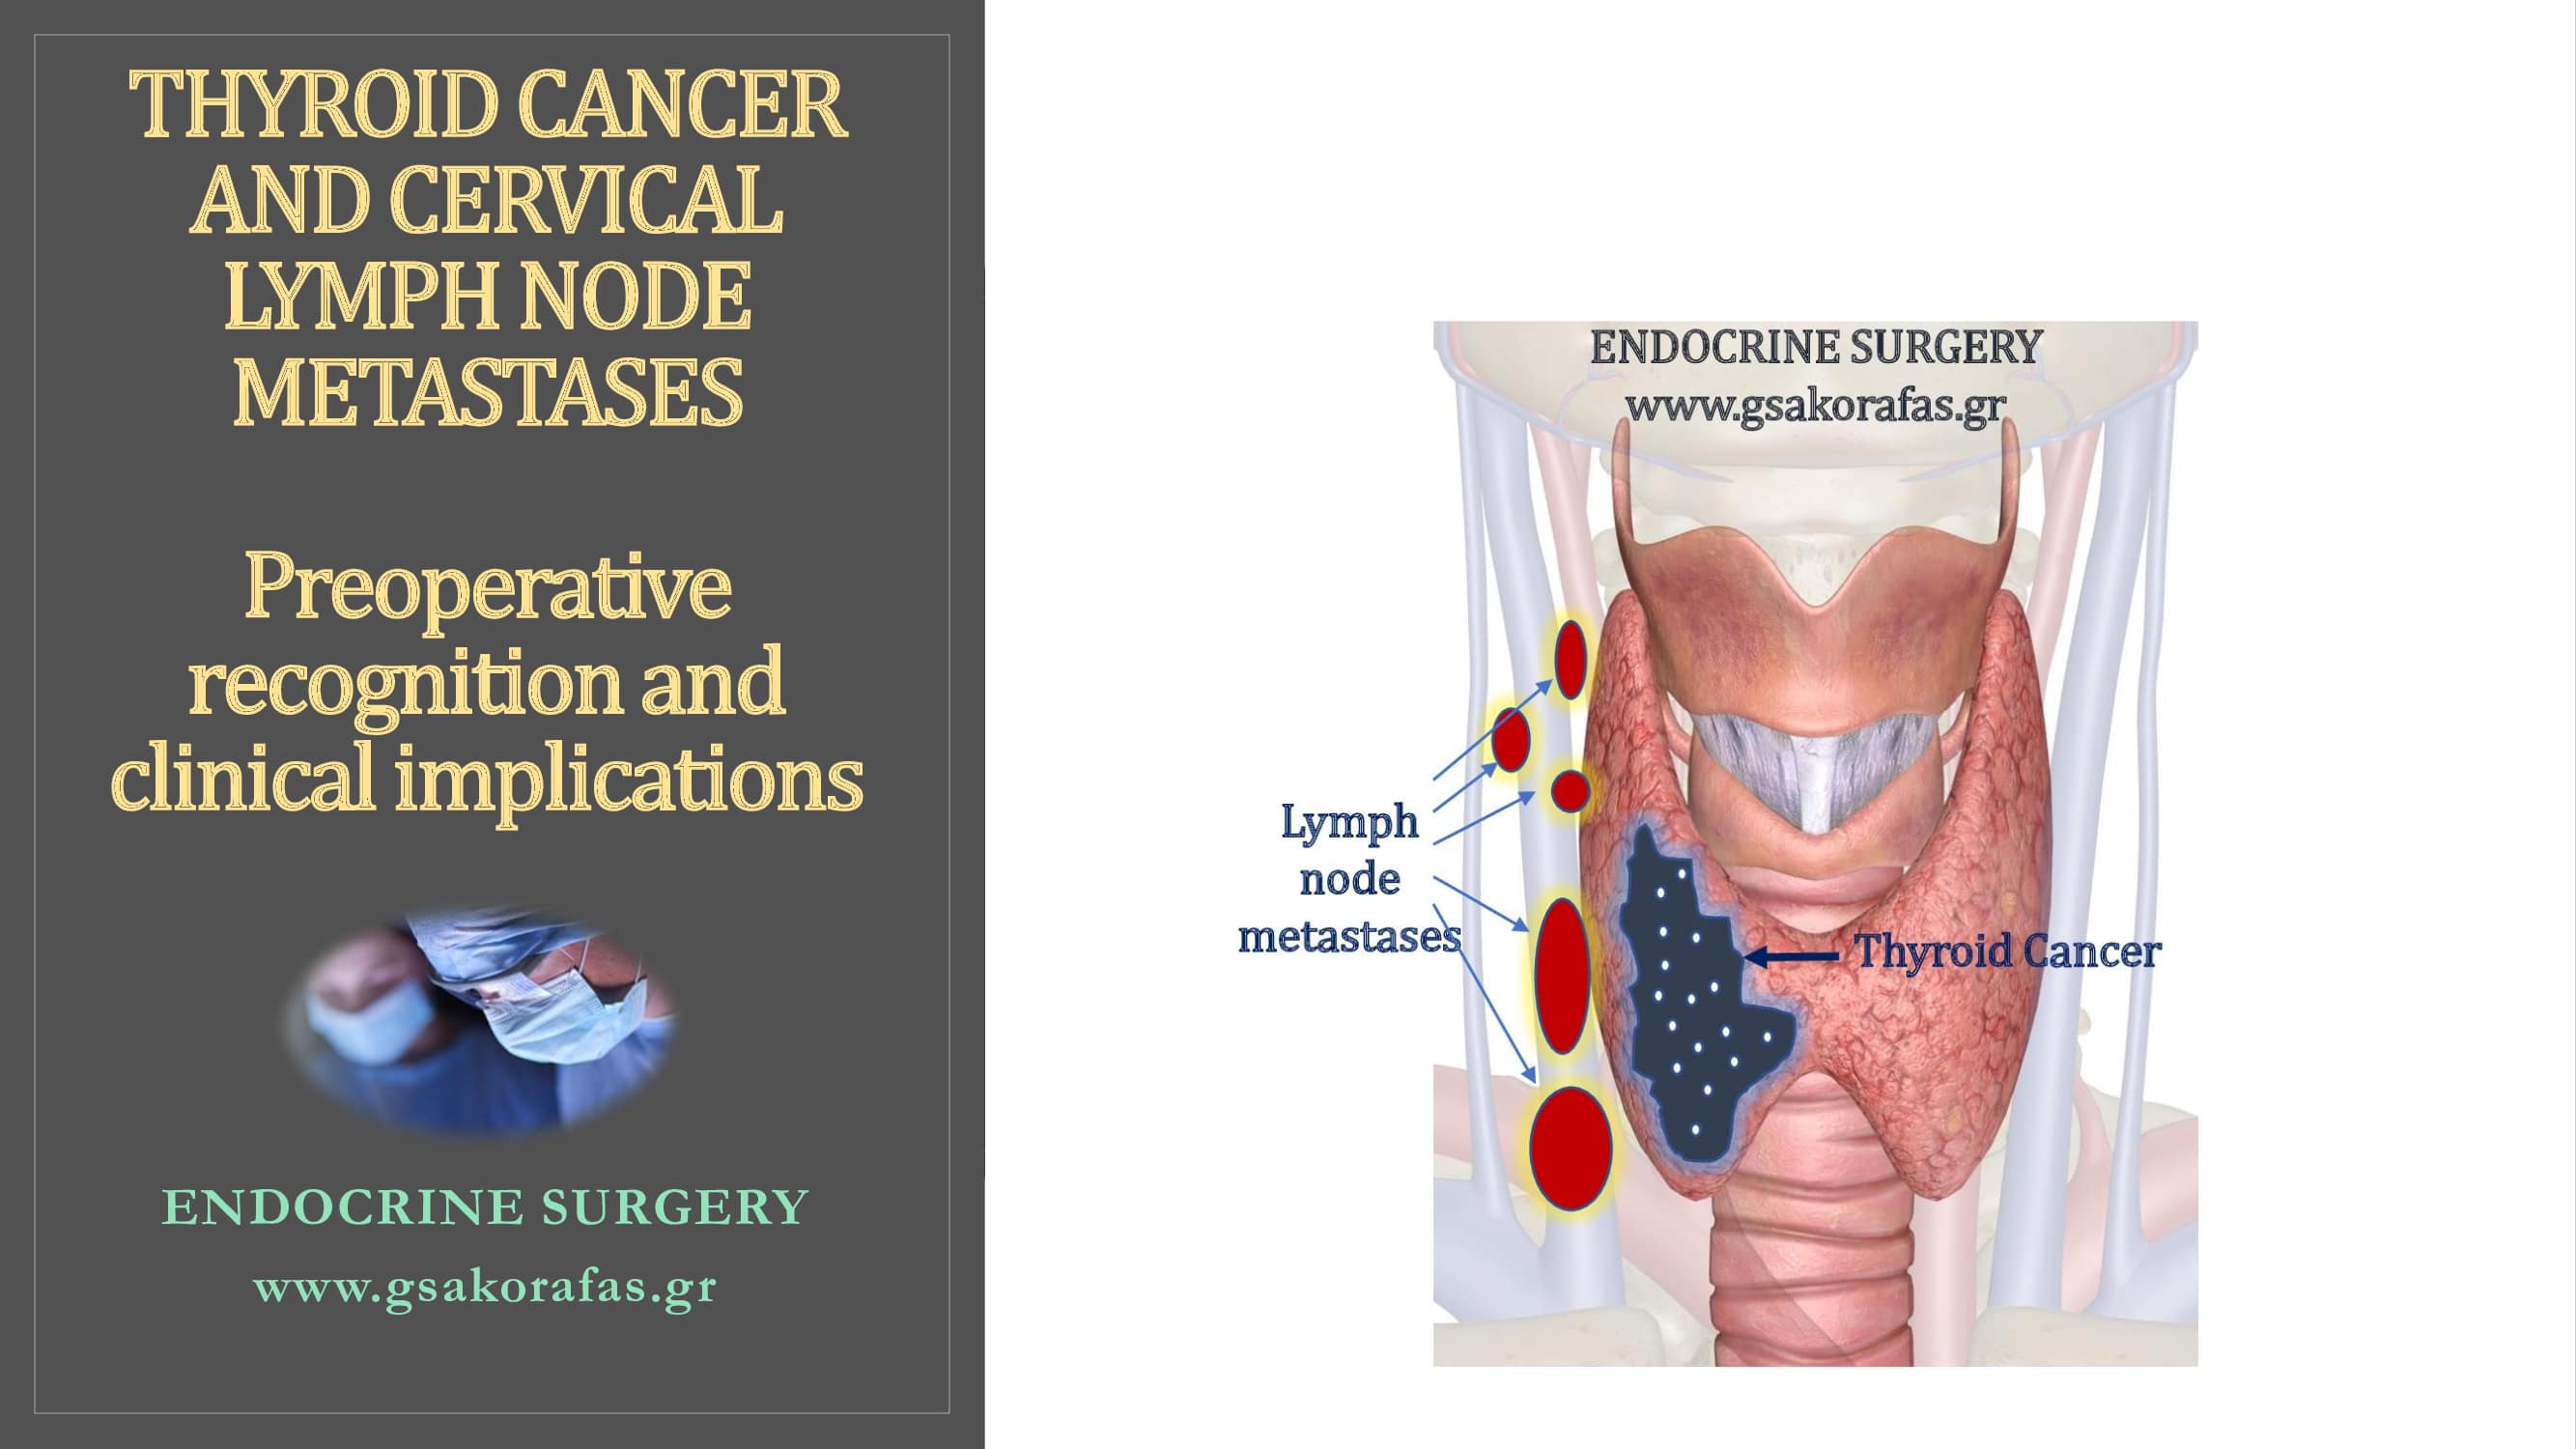 Thyroid cancer and lymph node metastases – Importance of preoperative diagnosis